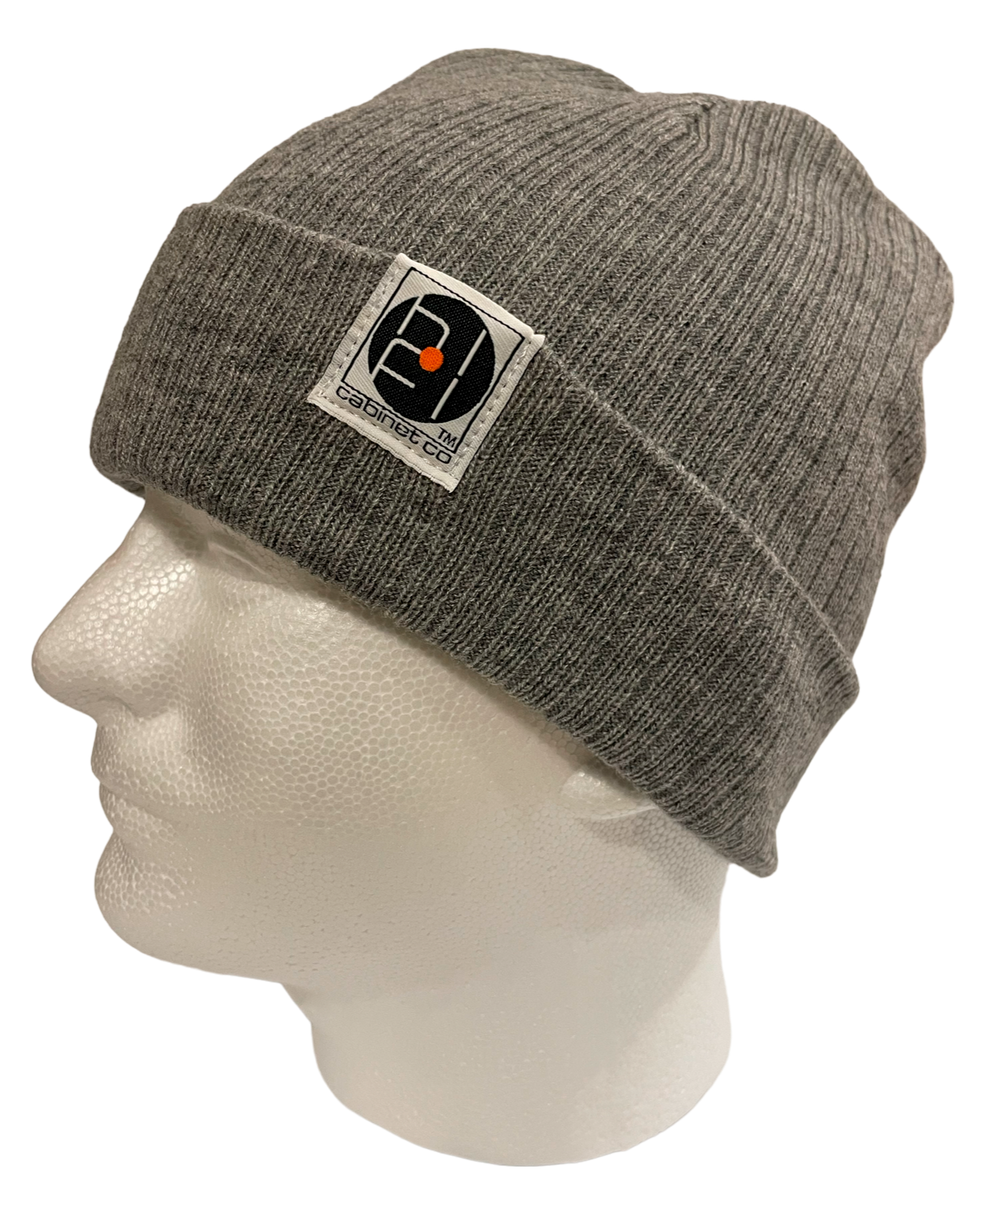 Eco-Friendly Beanie Made From Recycled Plastic Bottles.